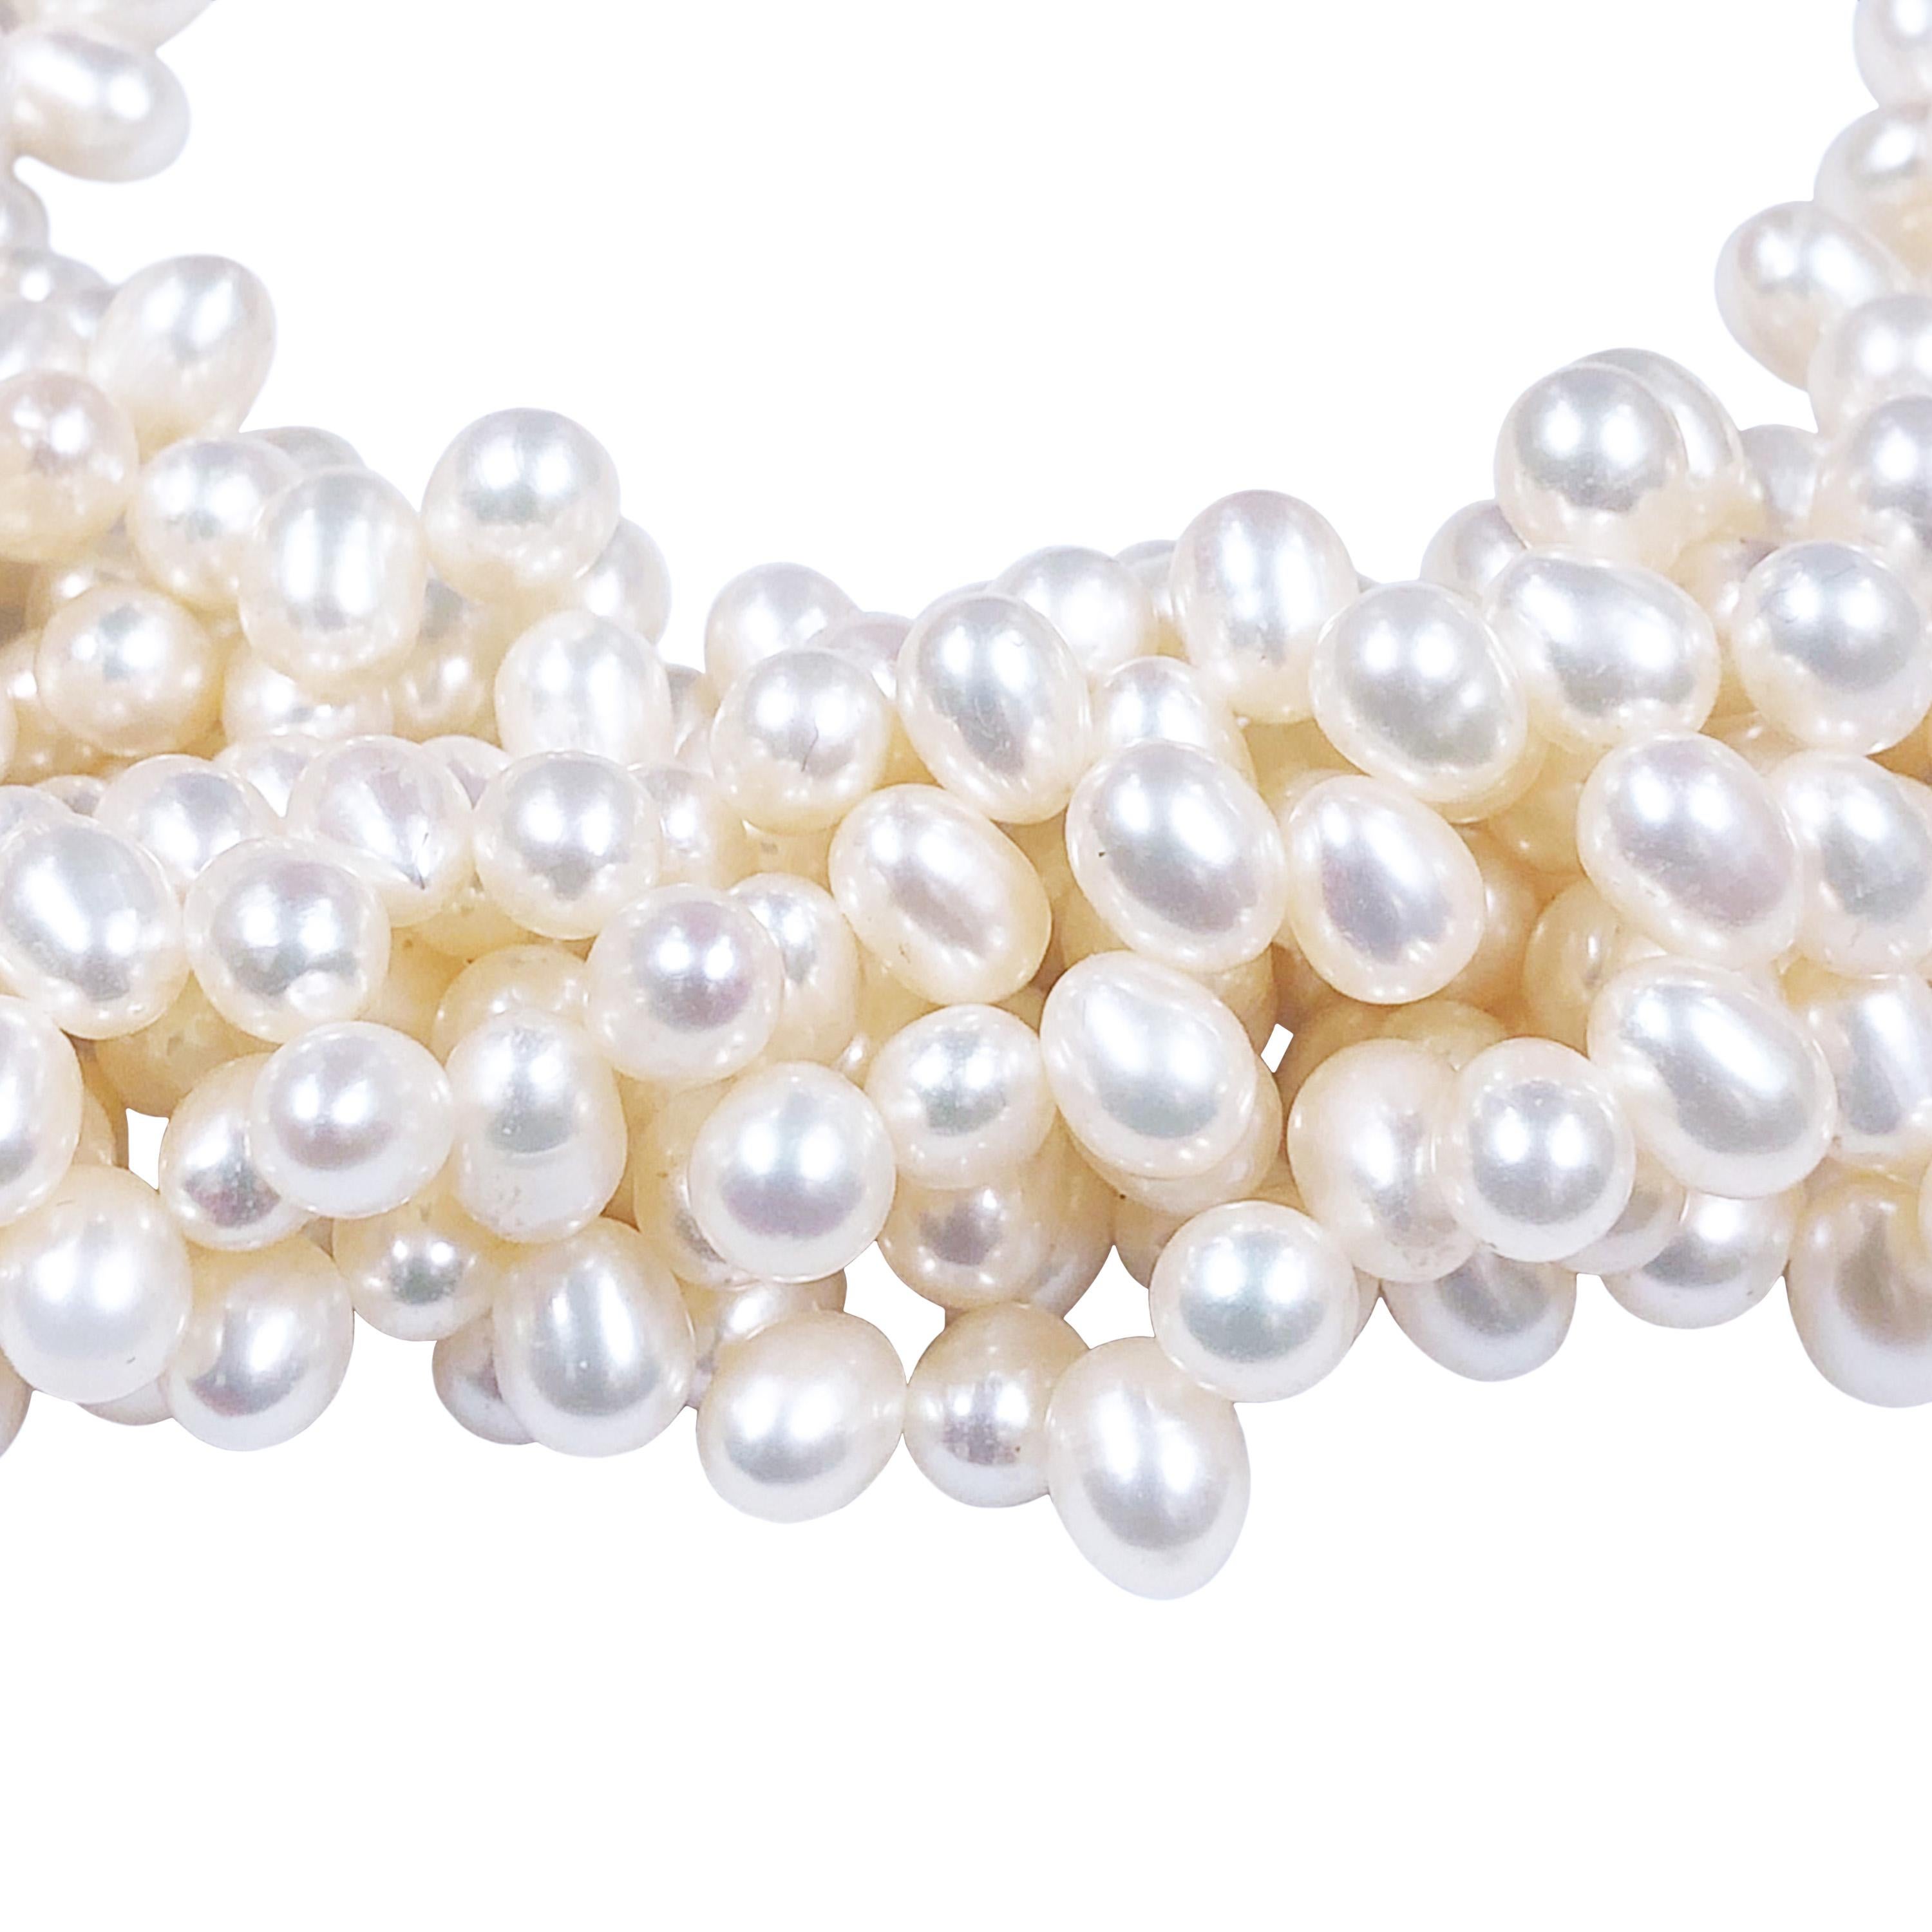 paloma picasso pearl necklace